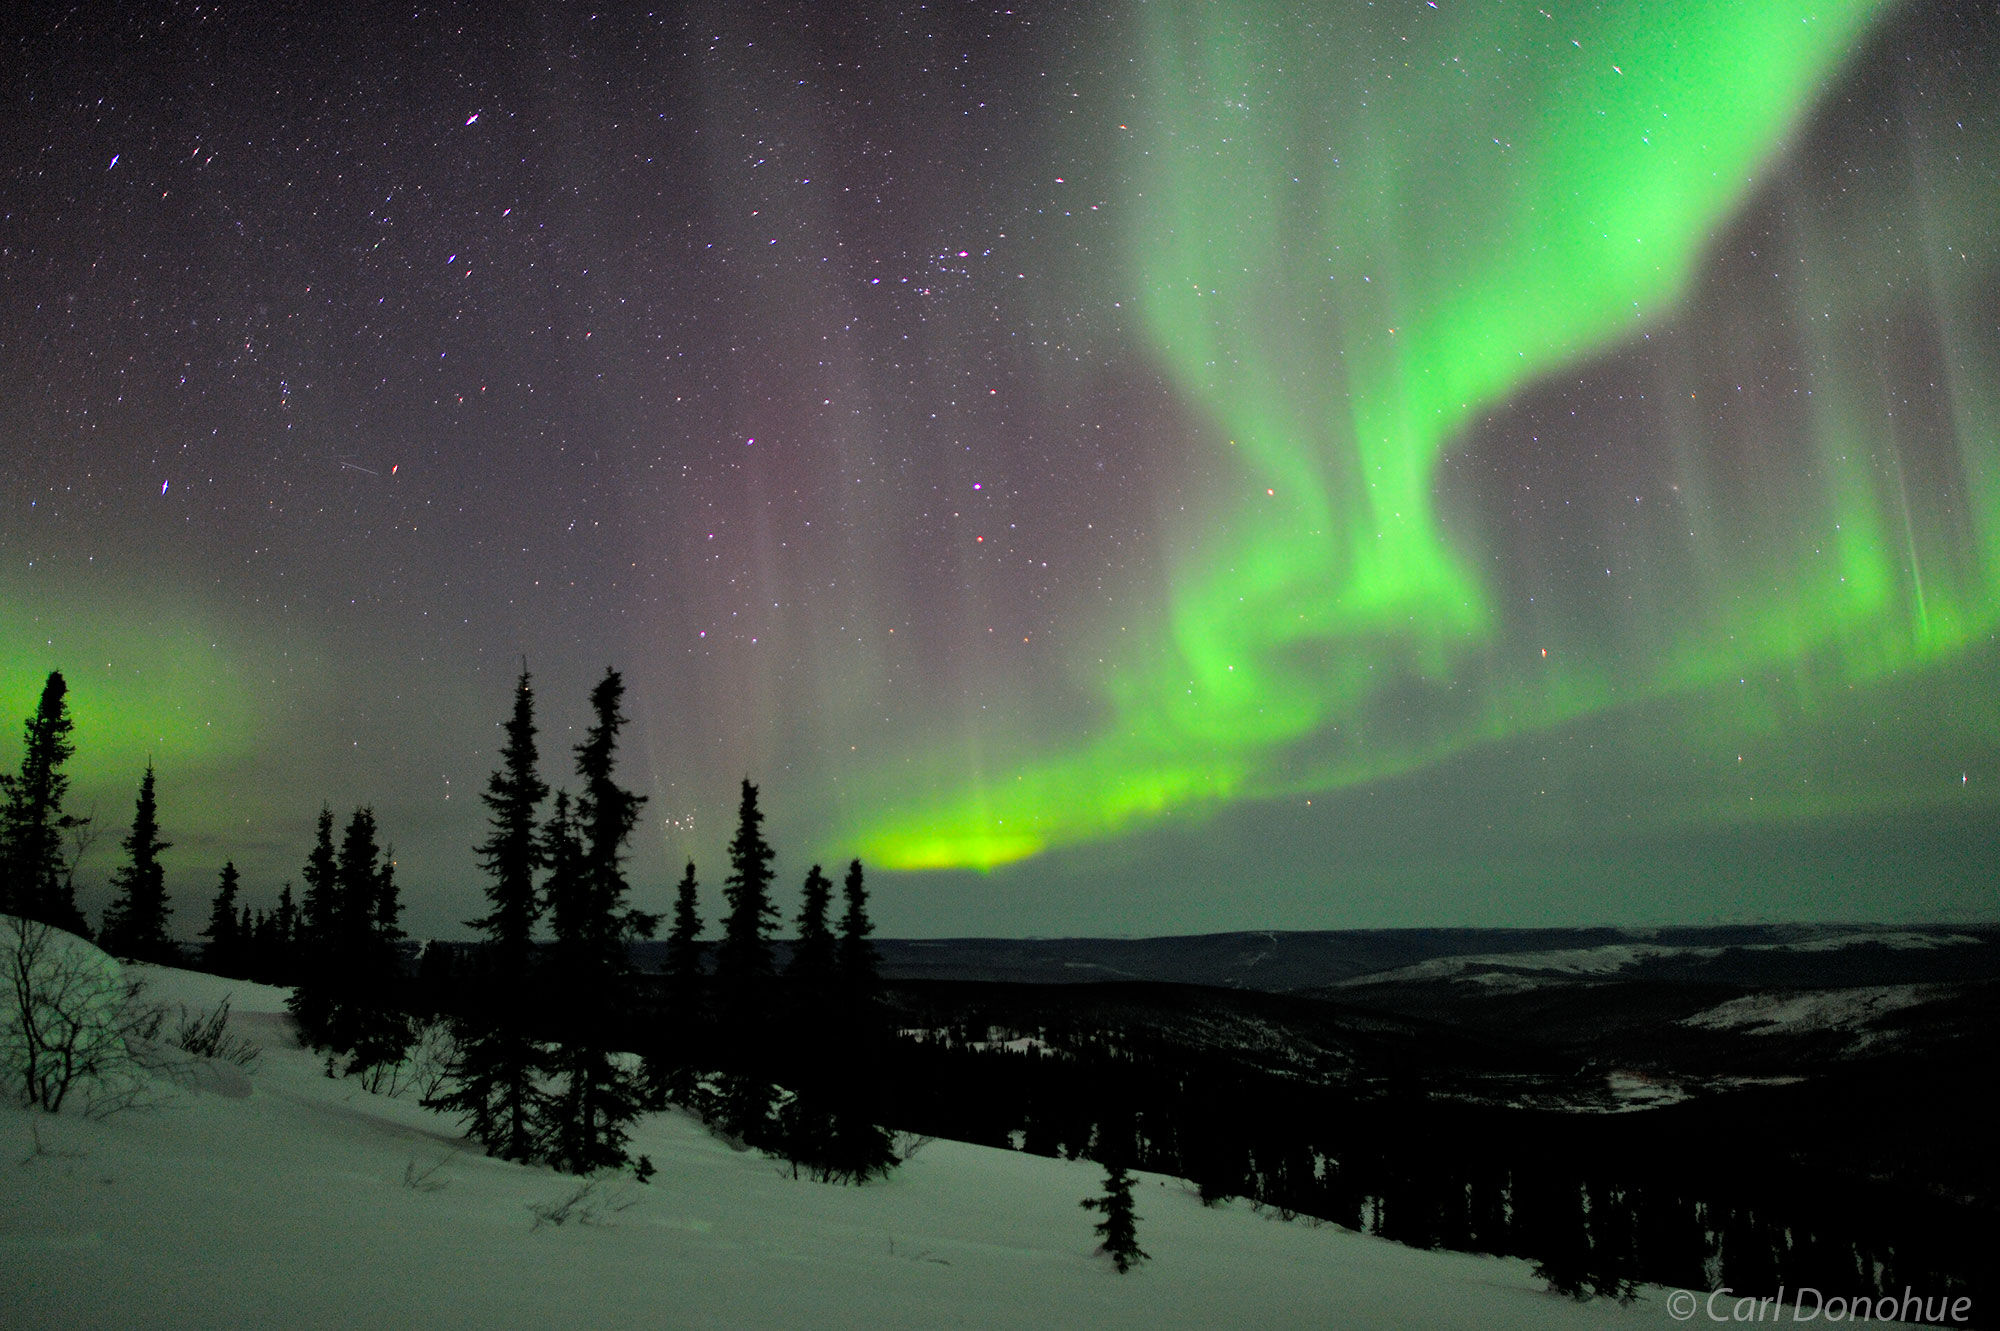 A very active and bright northern lights display north of Fairbanks, from Cleary Summit. Aurora borealis photo, or northern lights...